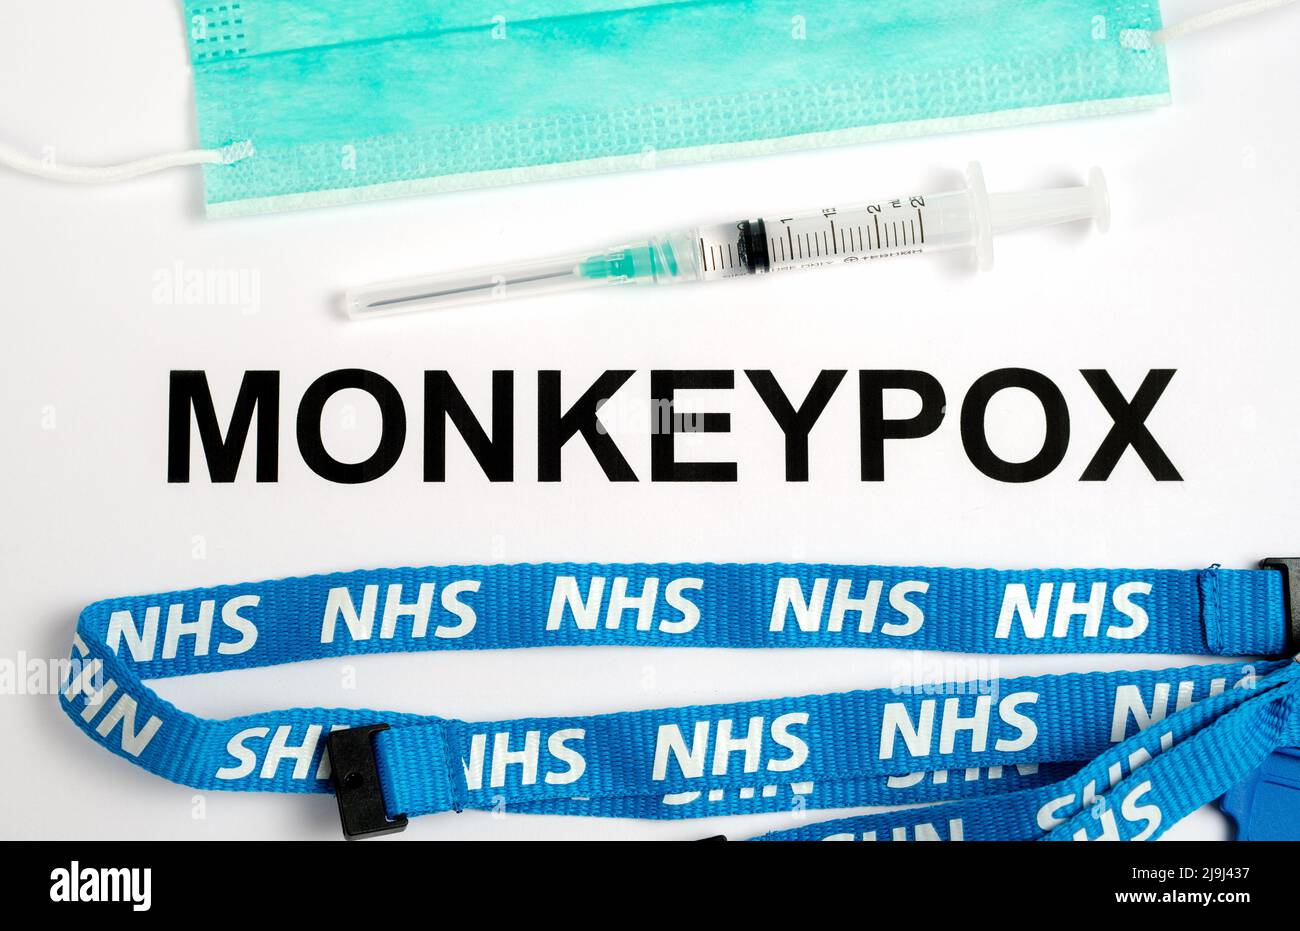 MONKEYPOX infection name seen printed on paper with syringe and NHS lanyard next to it. Concept. Stafford, United Kingdom, May 23, 2022. Stock Photo